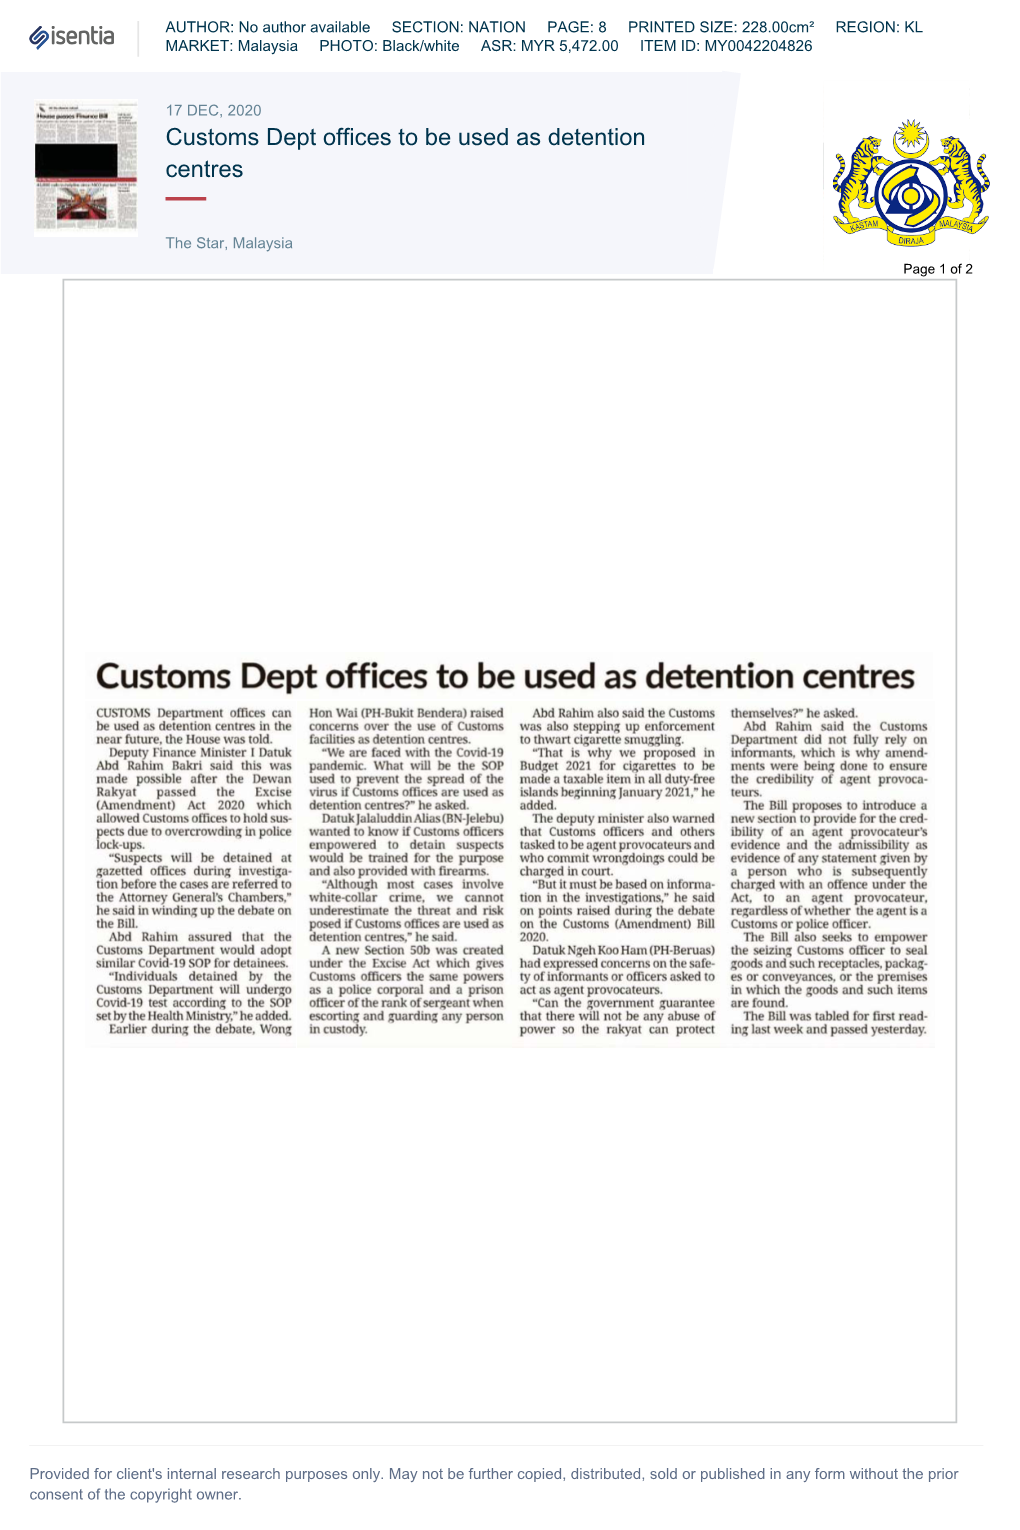 Customs Dept Offices to Be Used As Detention Centres